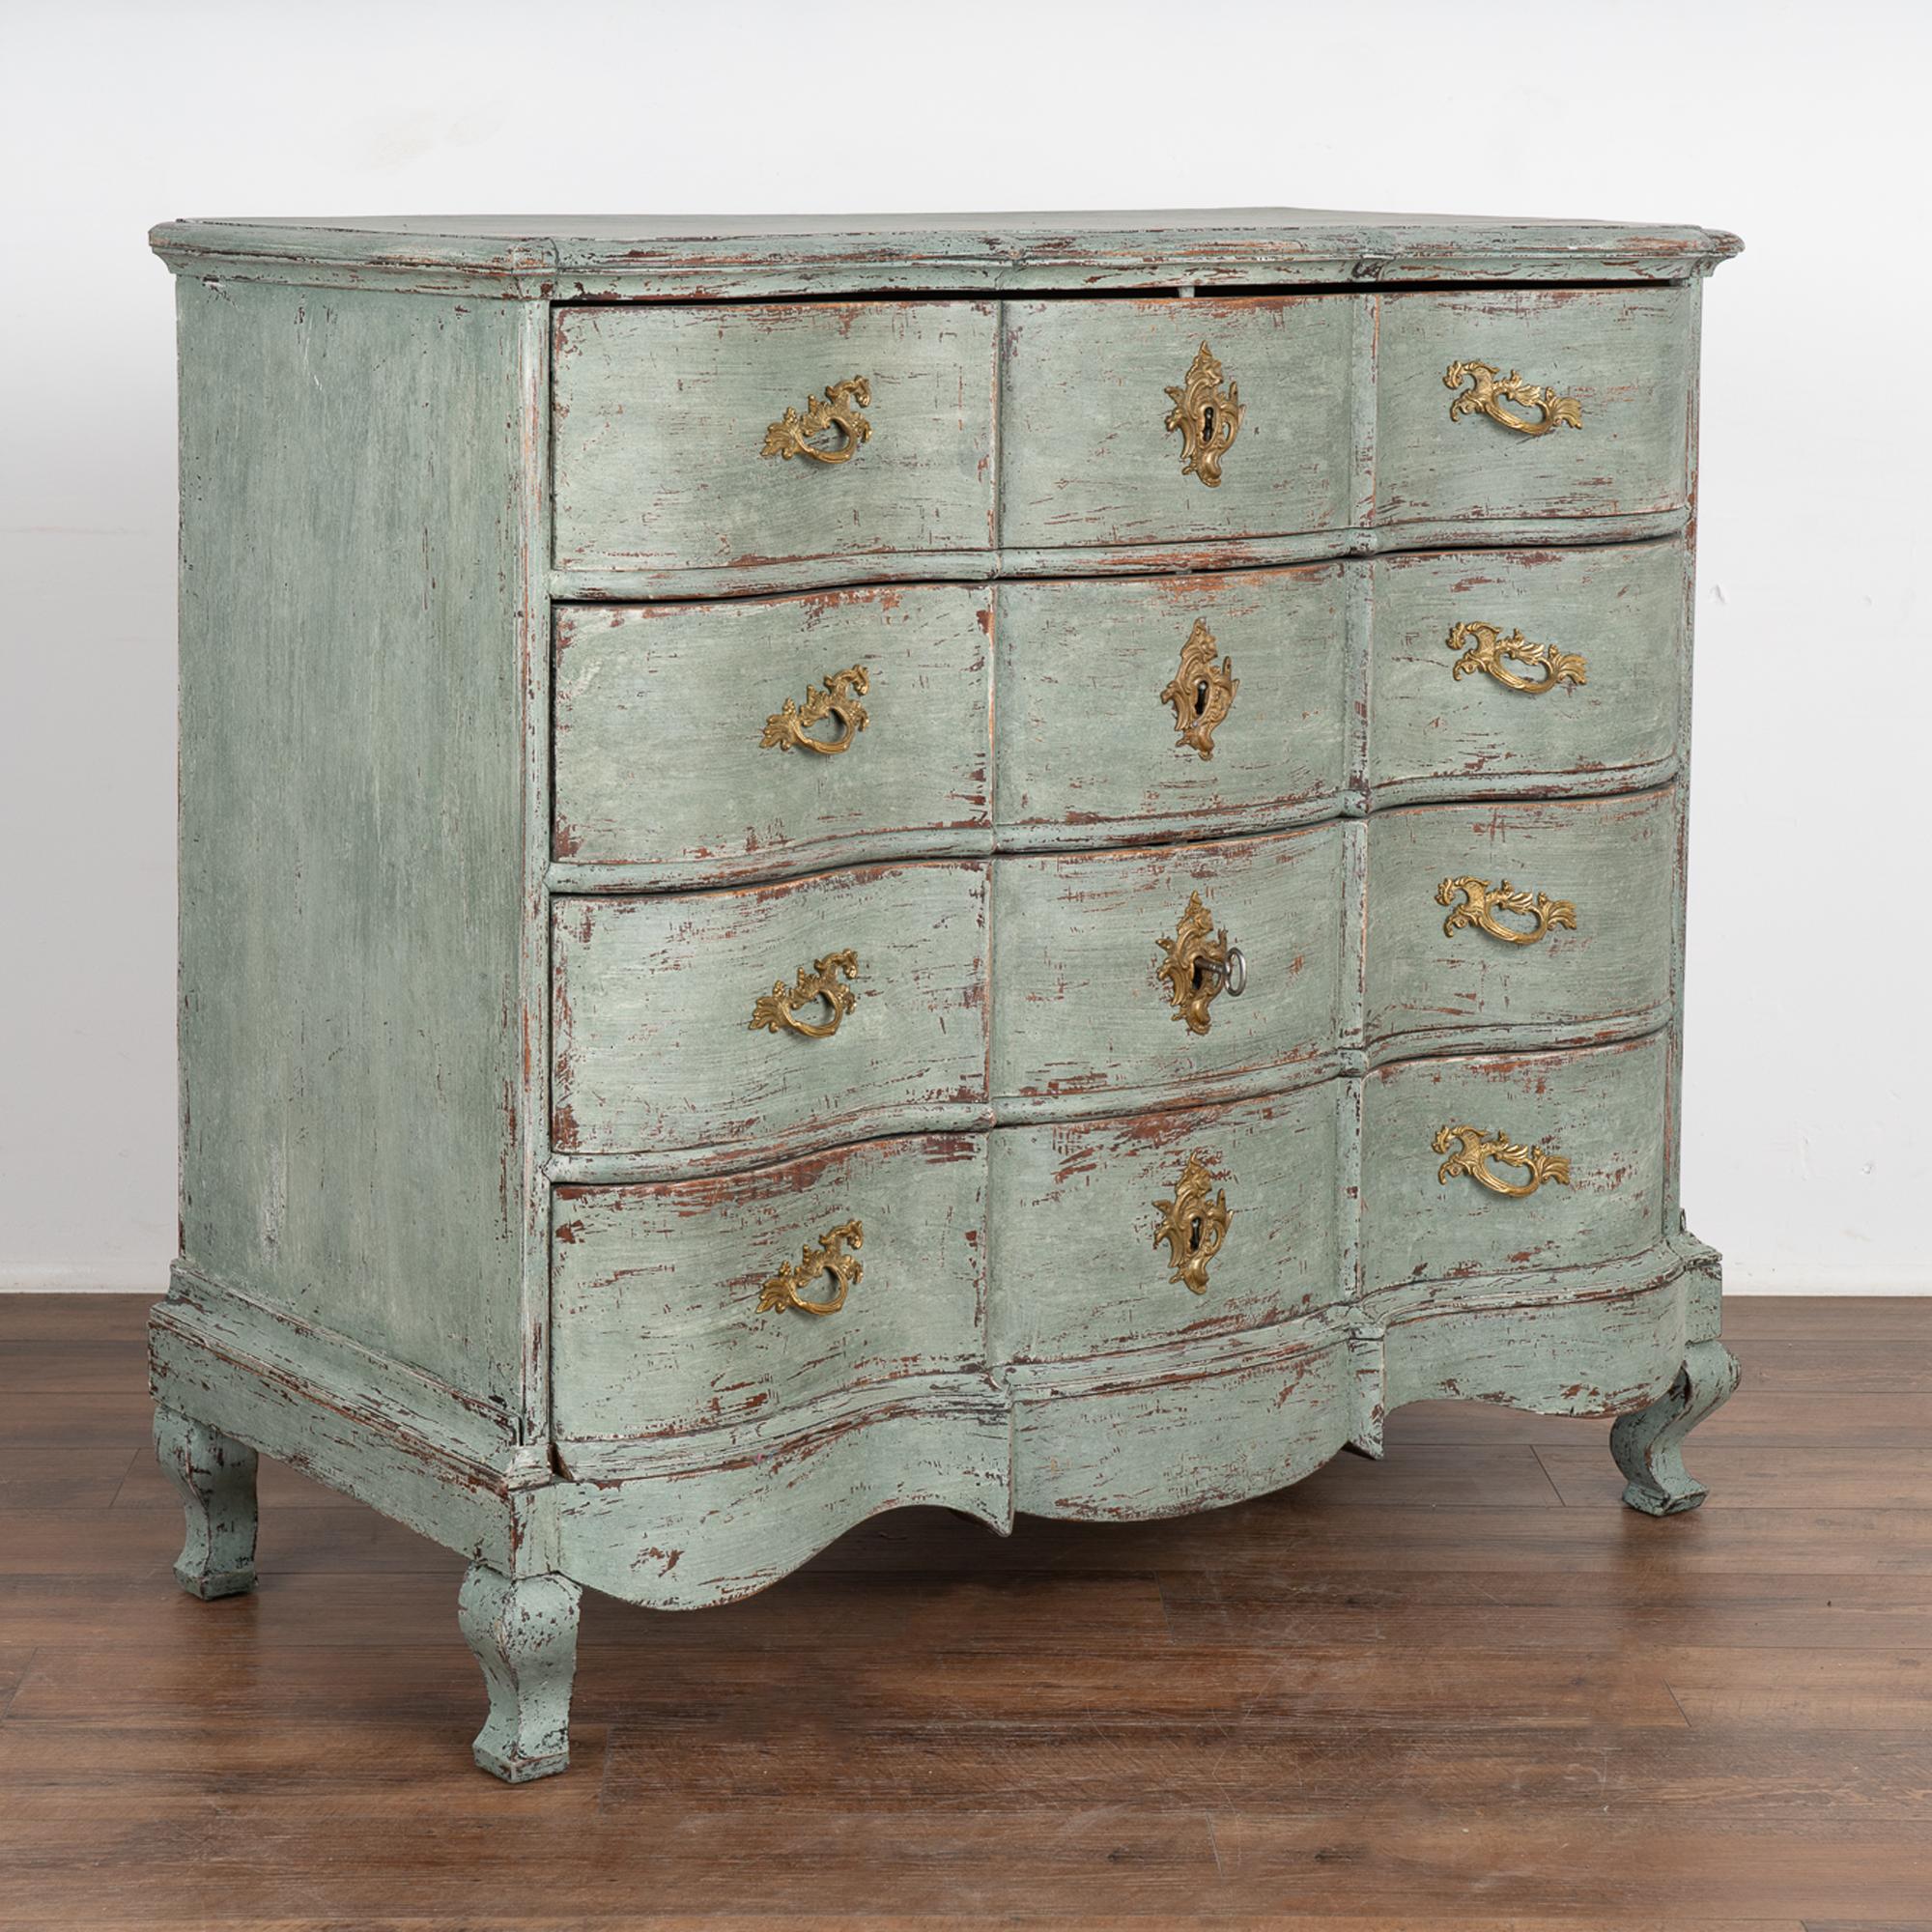 This large antique rococo oak chest of drawers features a serpentine front, brass hardware pulls and rests on cabriolet feet.
It has been given an exceptional new professional seafoam blue layered painted finish and has been lightly distressed,